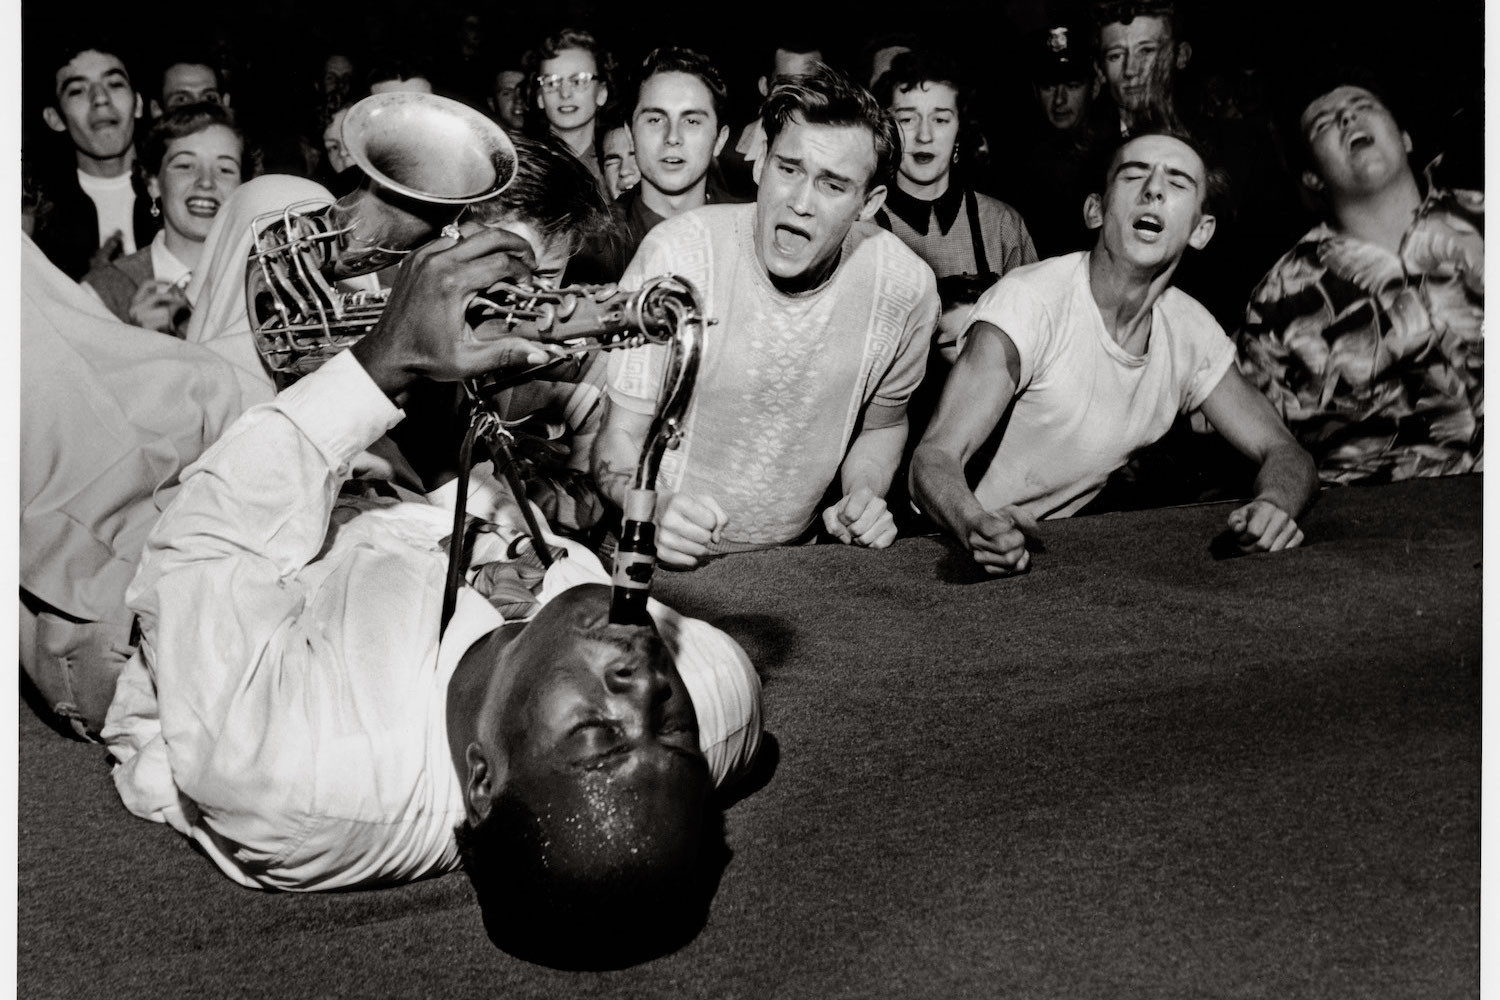 Big Jay McNeely lying on the stage playing his saxophone in front of screaming fans